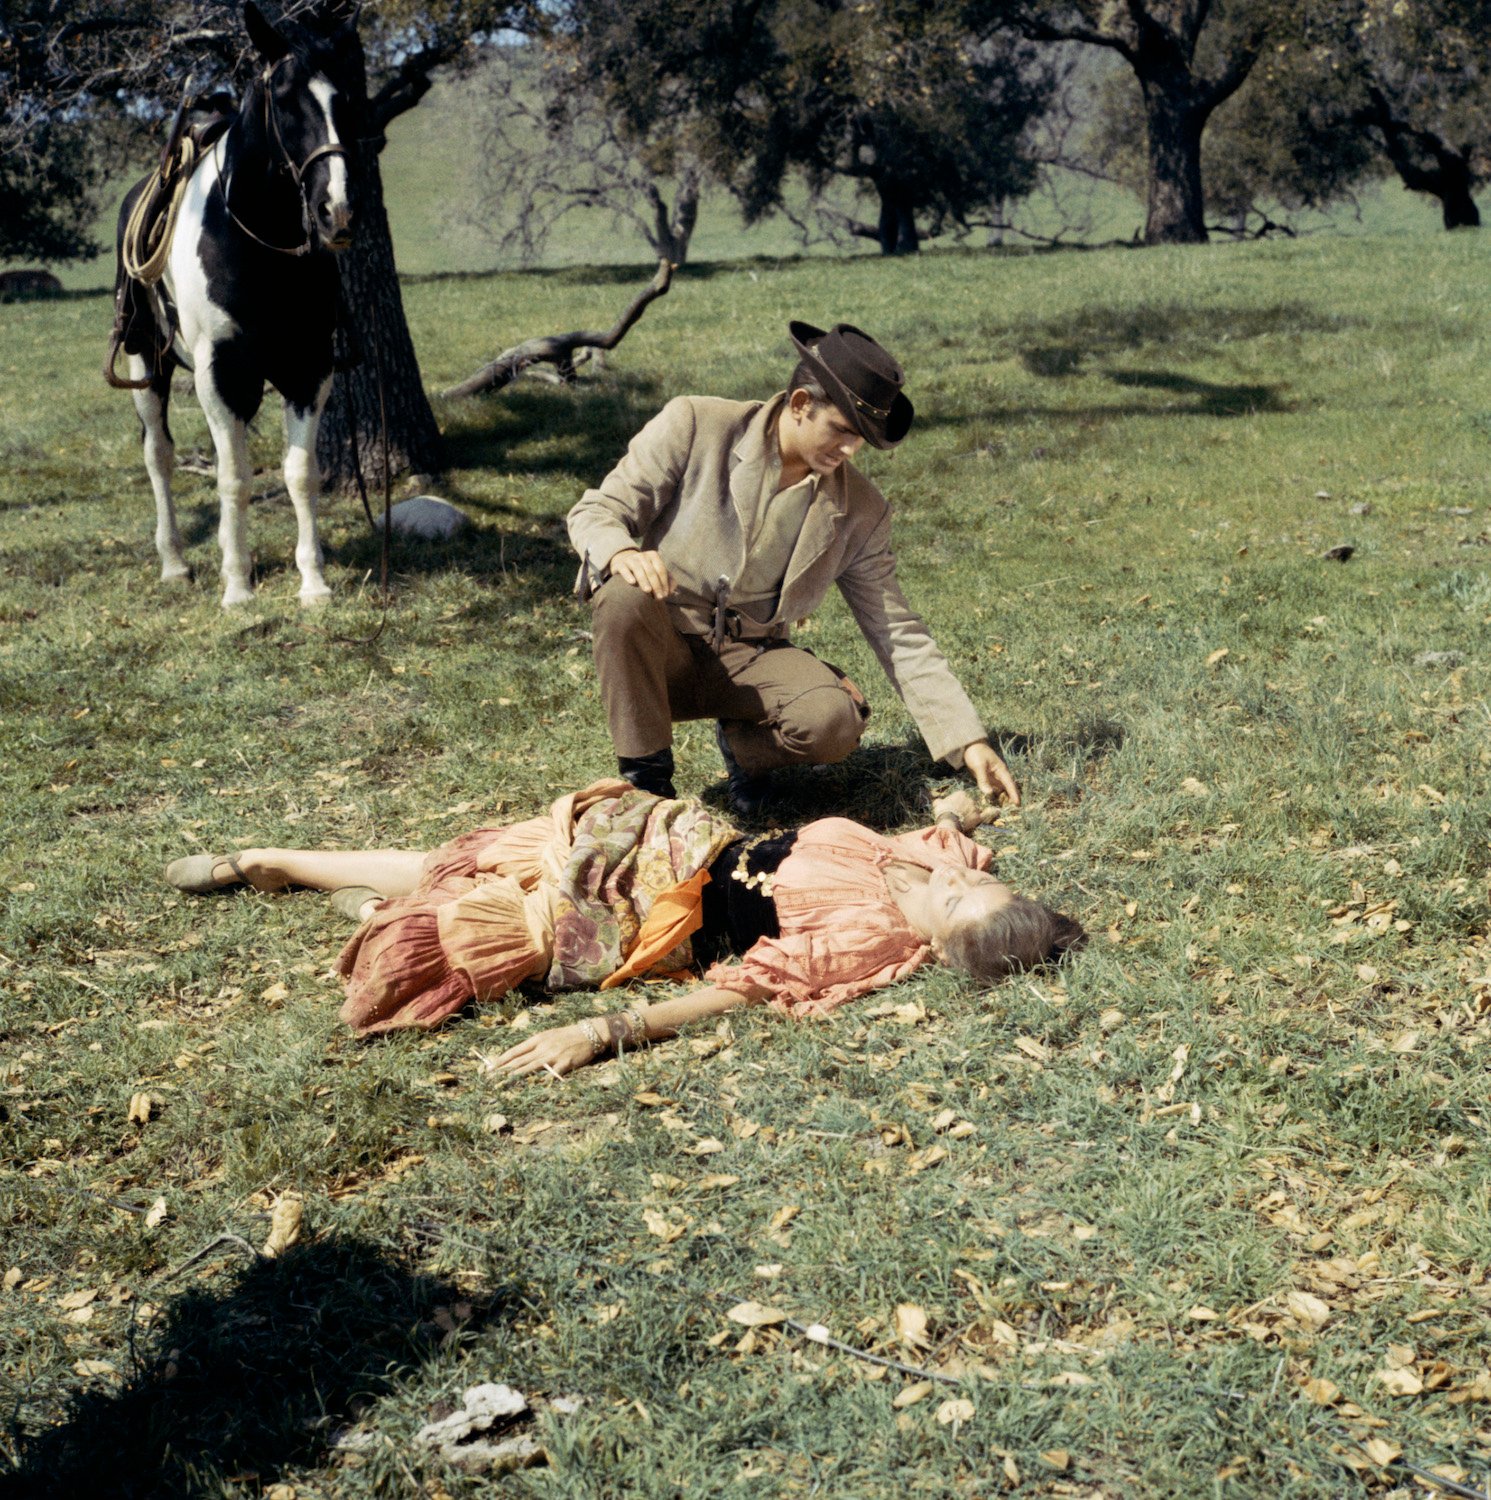 Michael Landon standing over a woman on the ground in 'Bonanza'